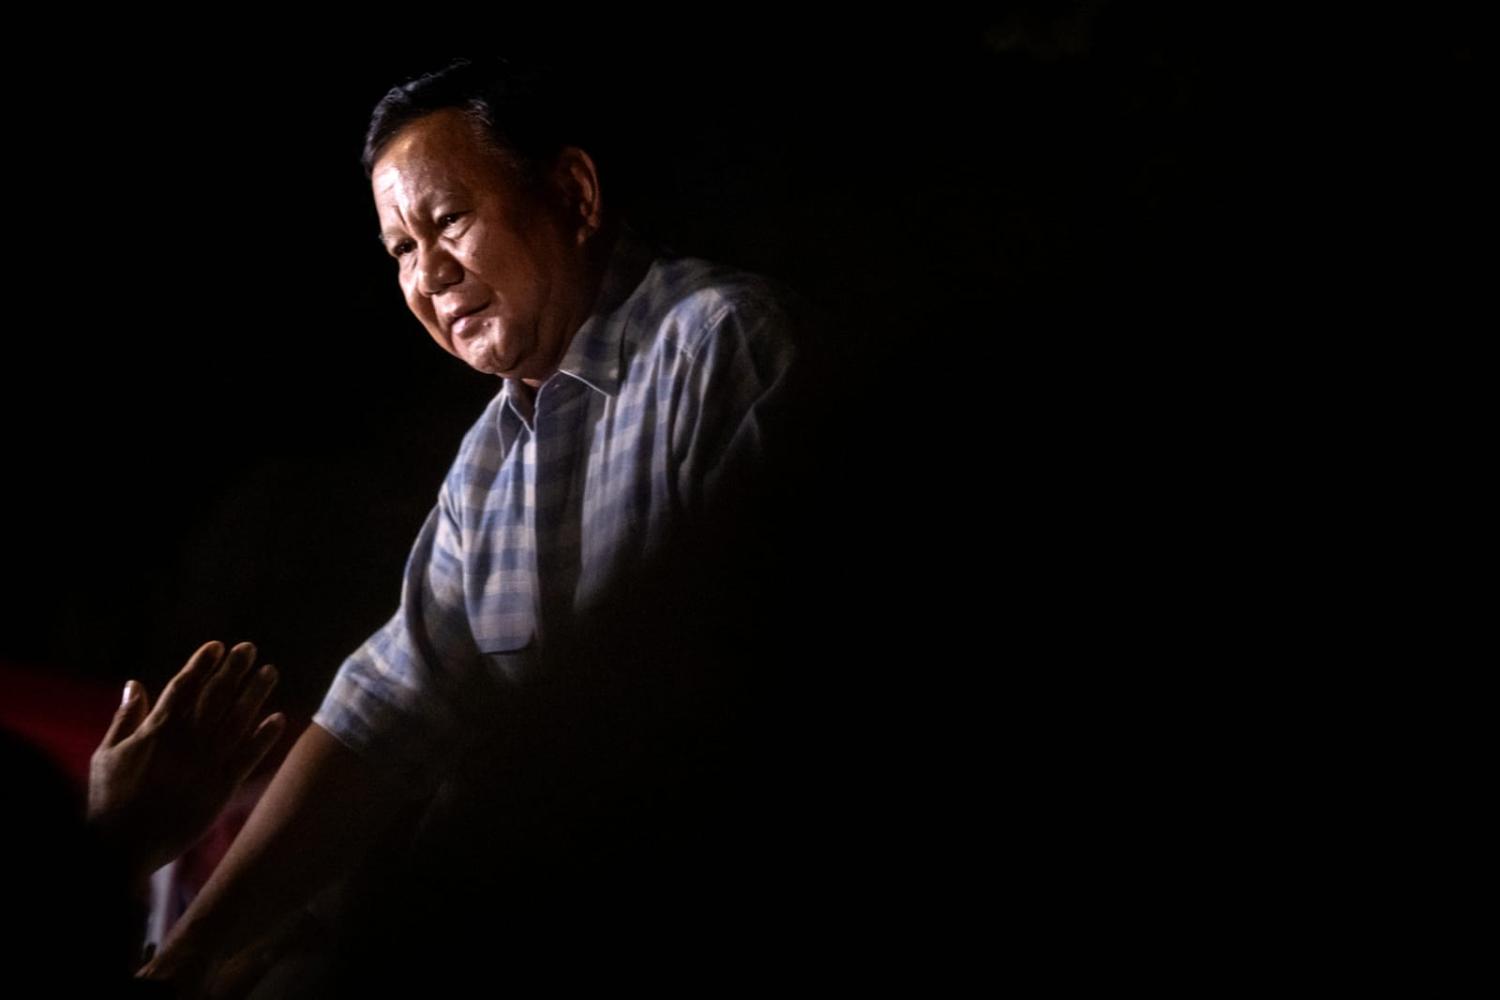 Prabowo Subianto claimed victory in the first round of Indonesia's presidential election on 14 February (Yasuyoshi Chiba/AFP via Getty Images)